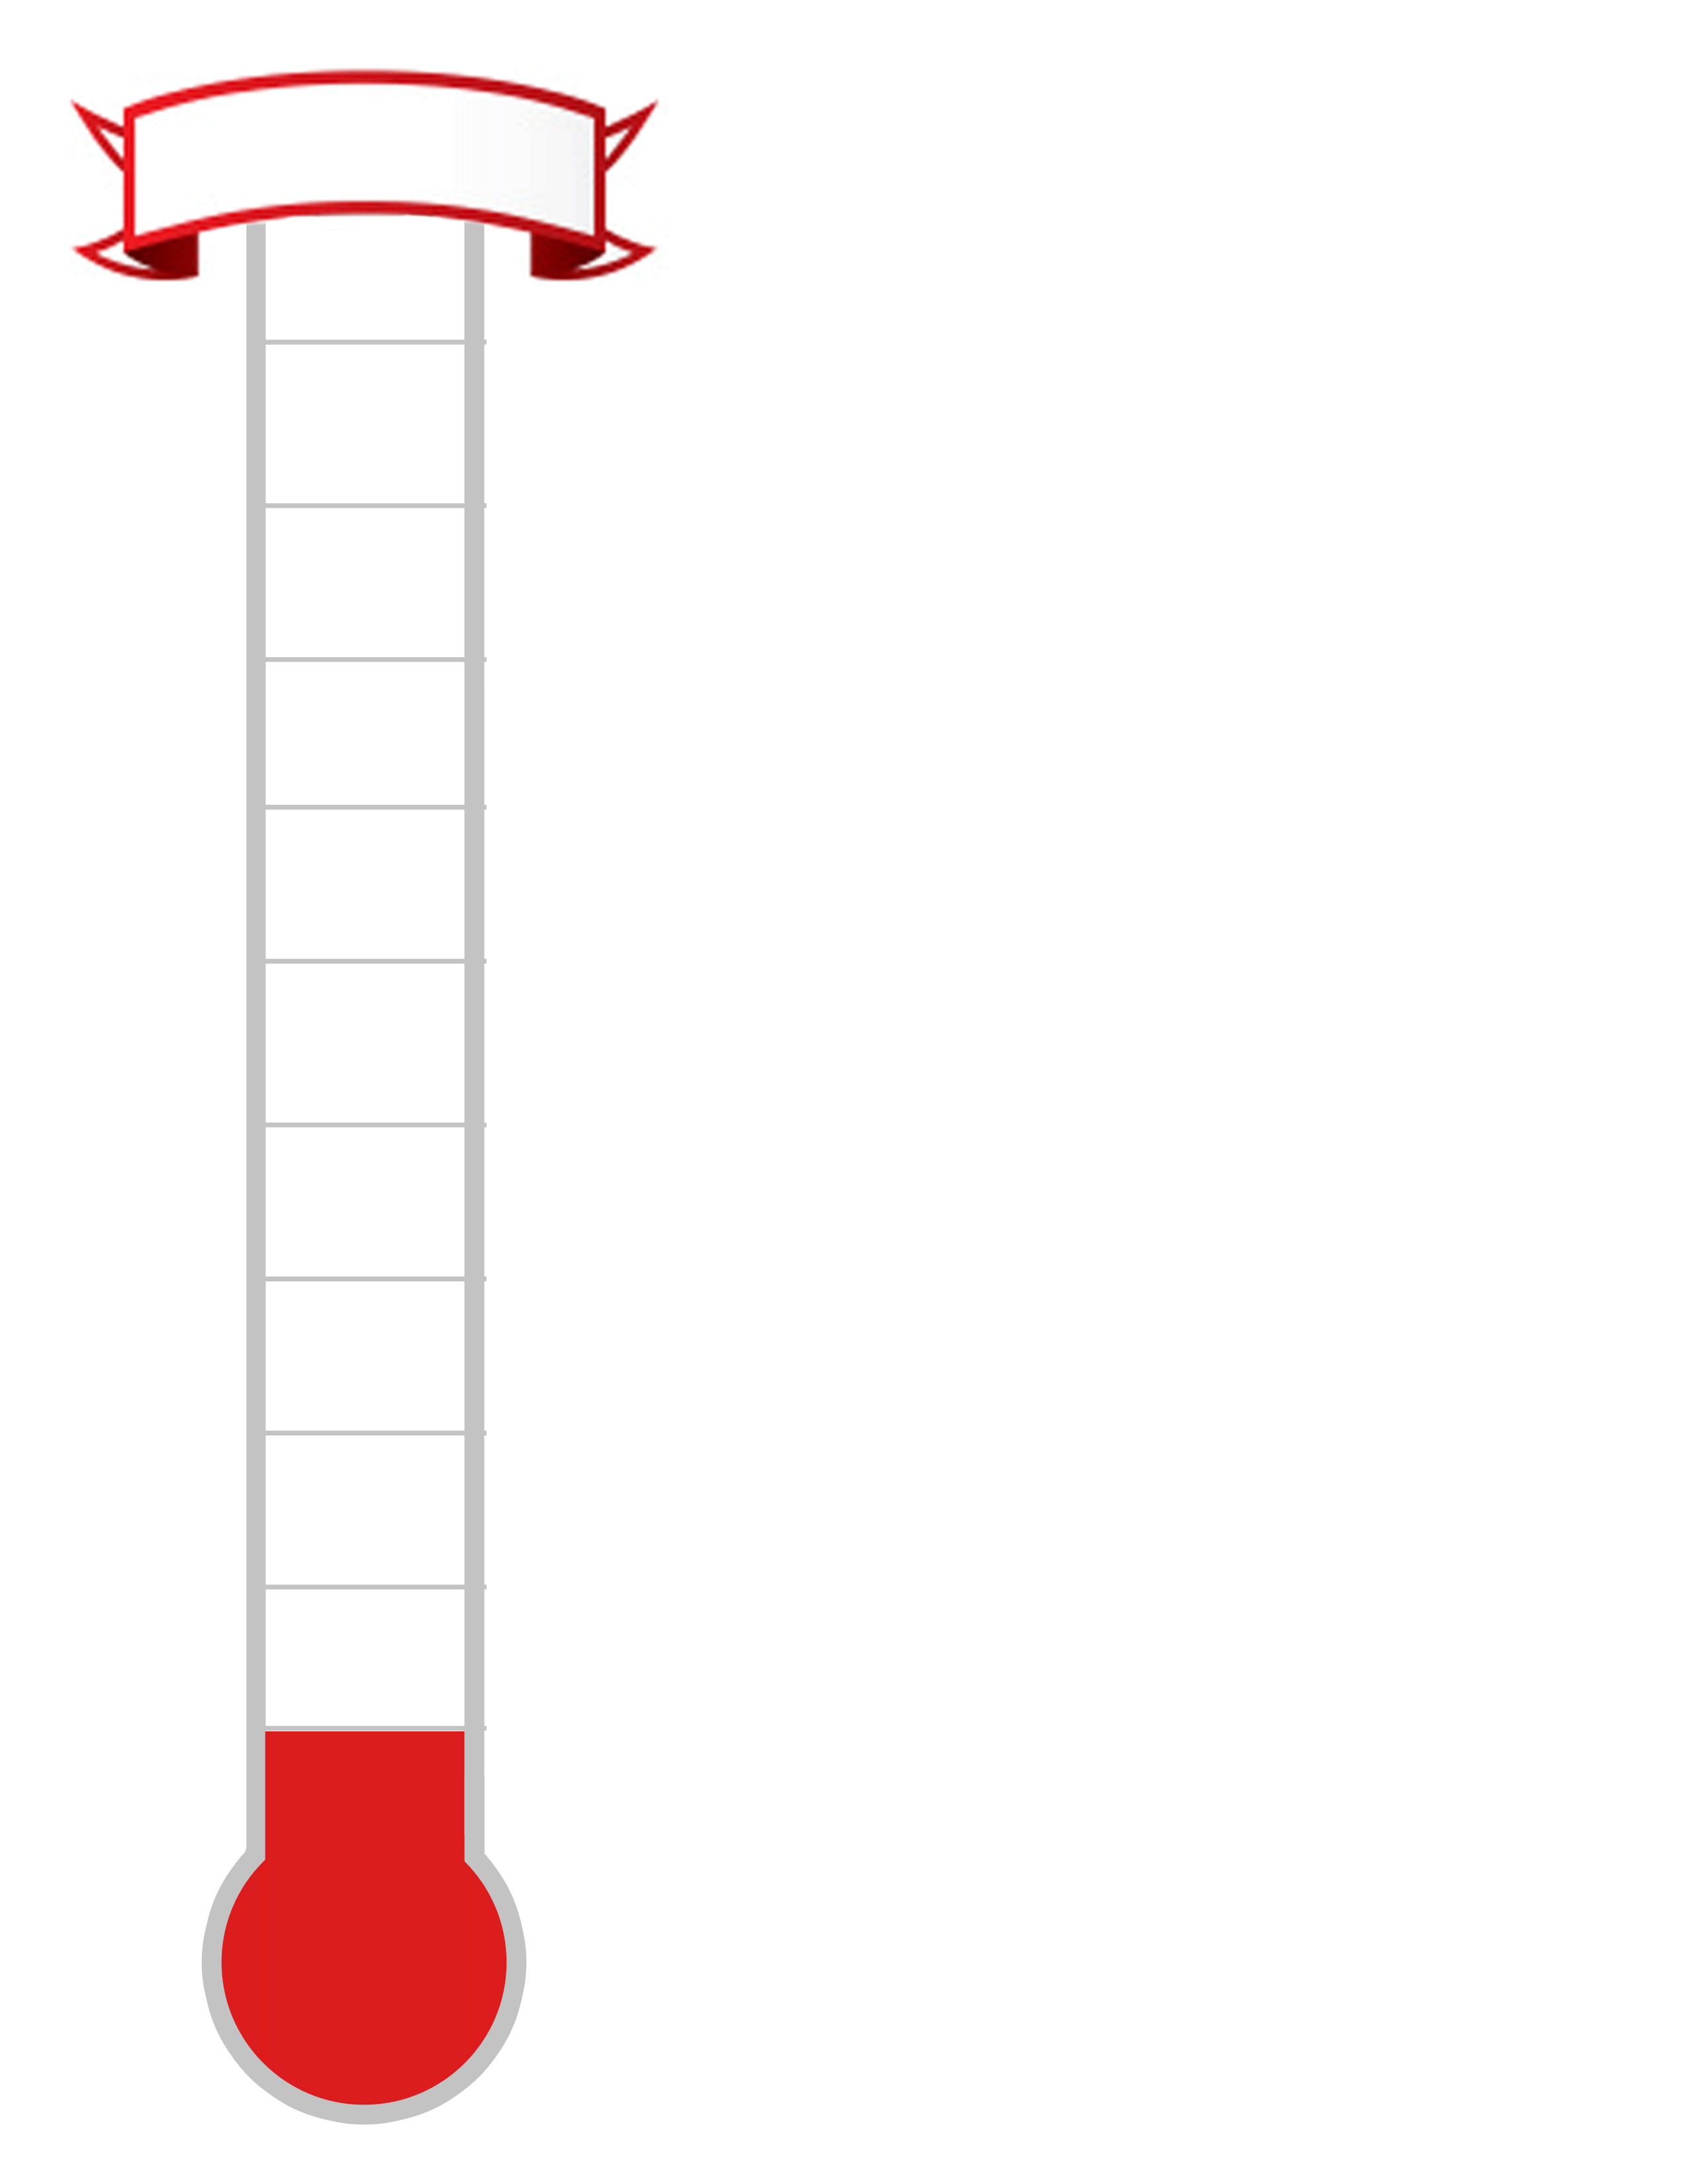 Thermometer 2 Blank   Thermometer Template